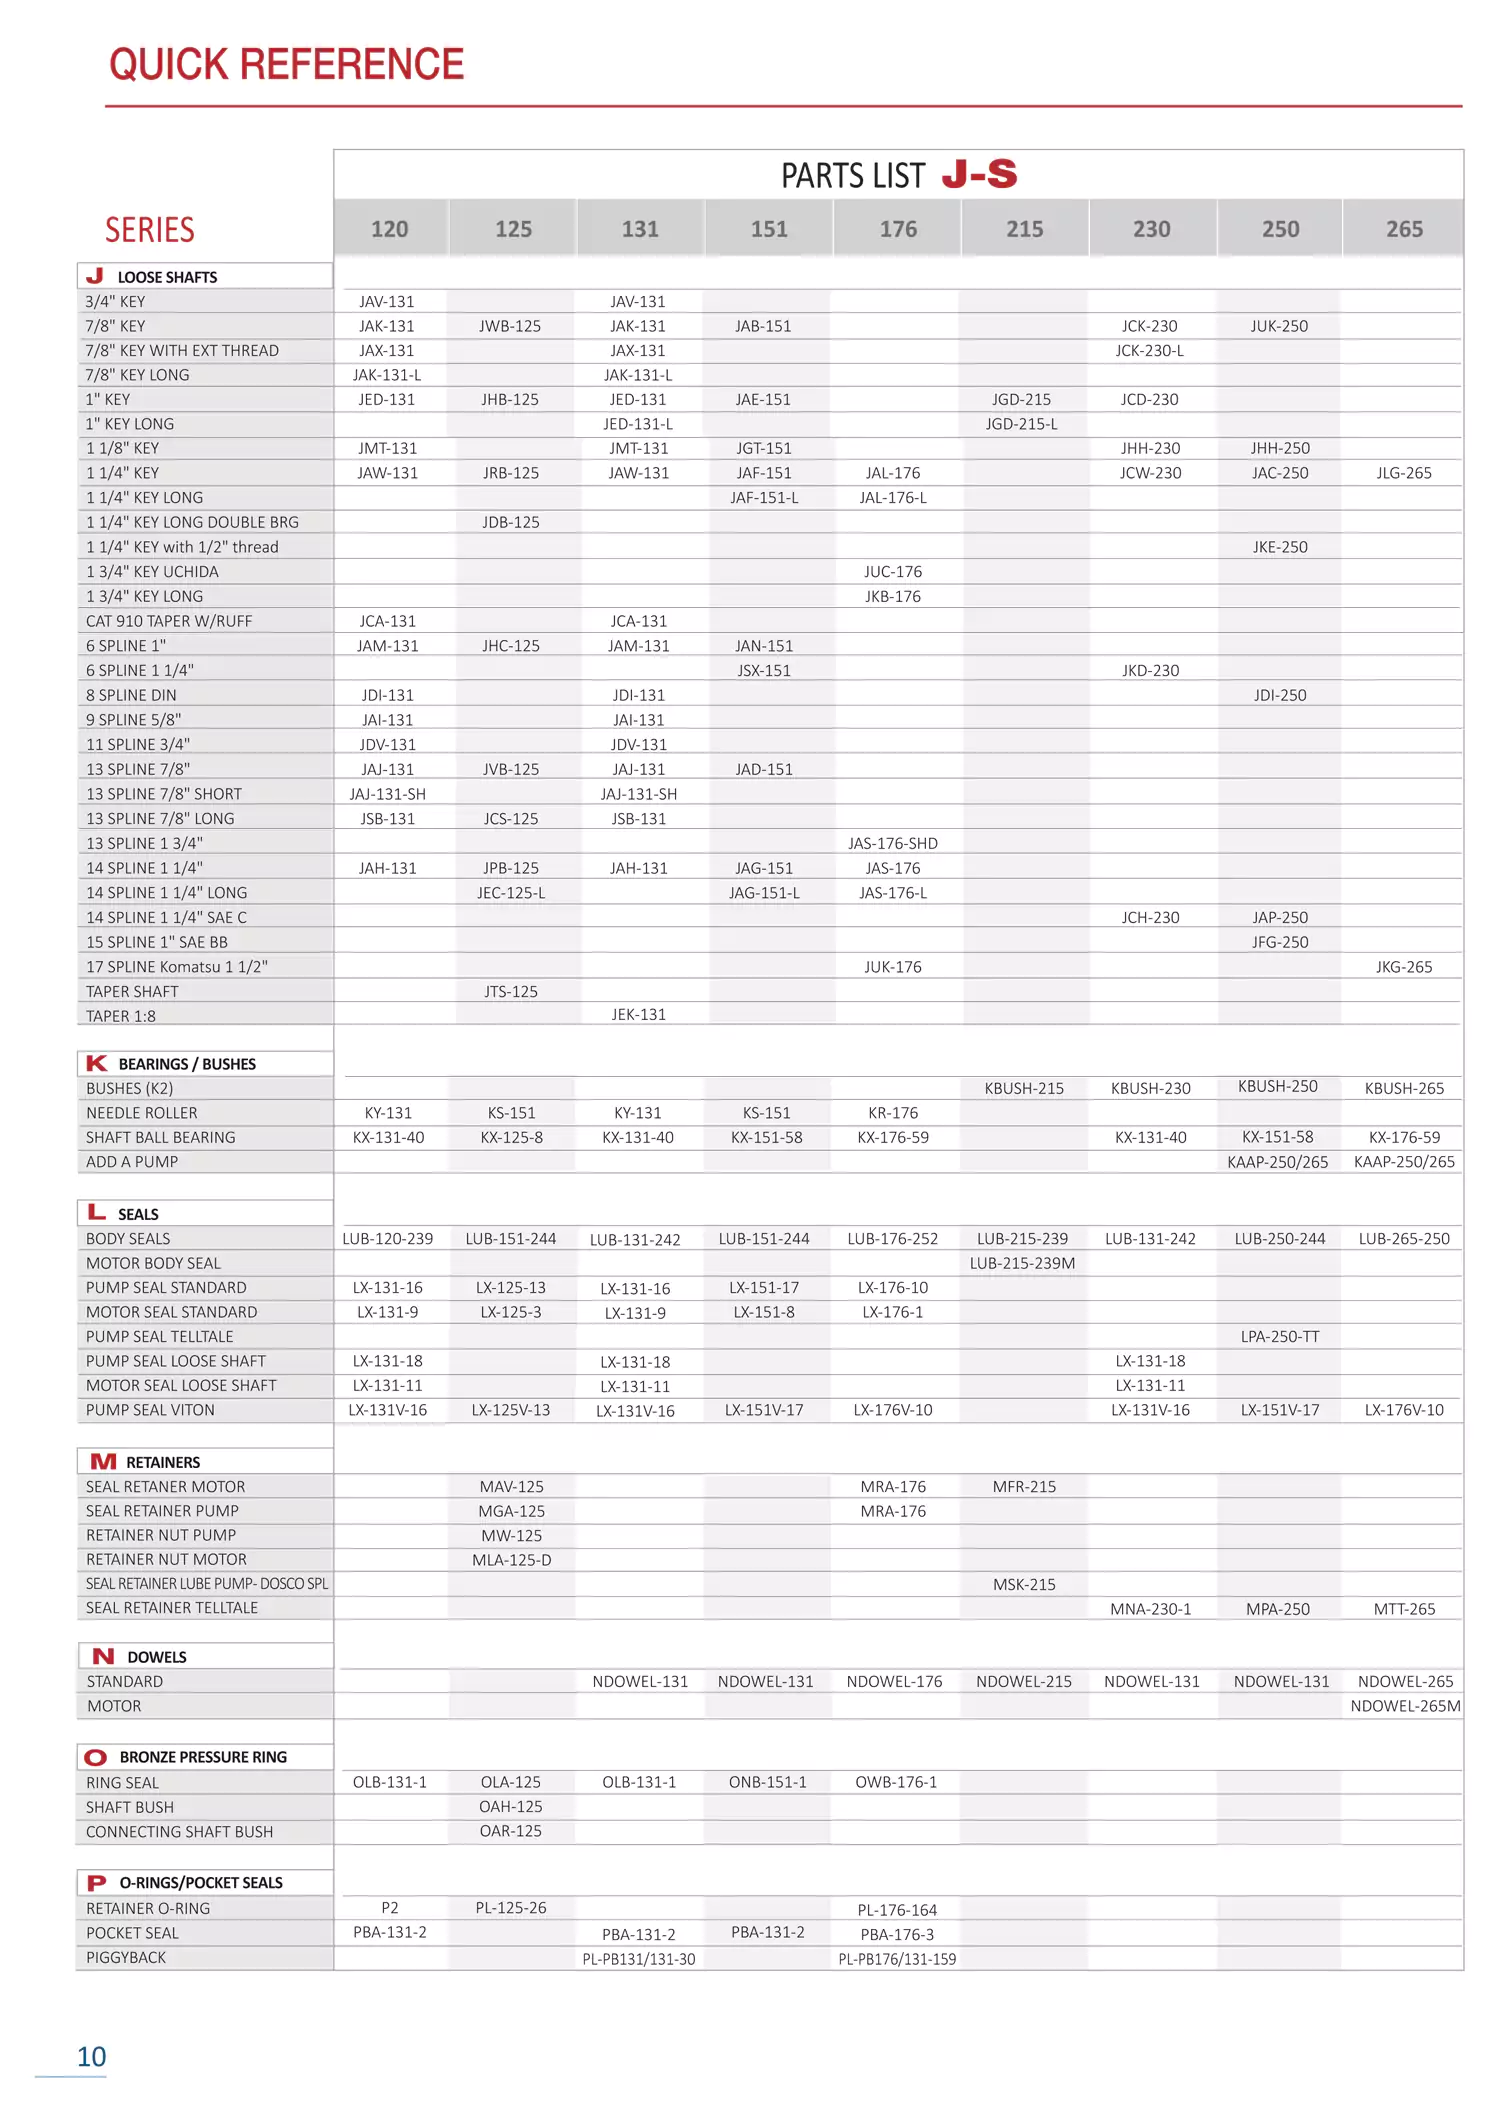 Page-10 - Quick Reference - Parts List J-S